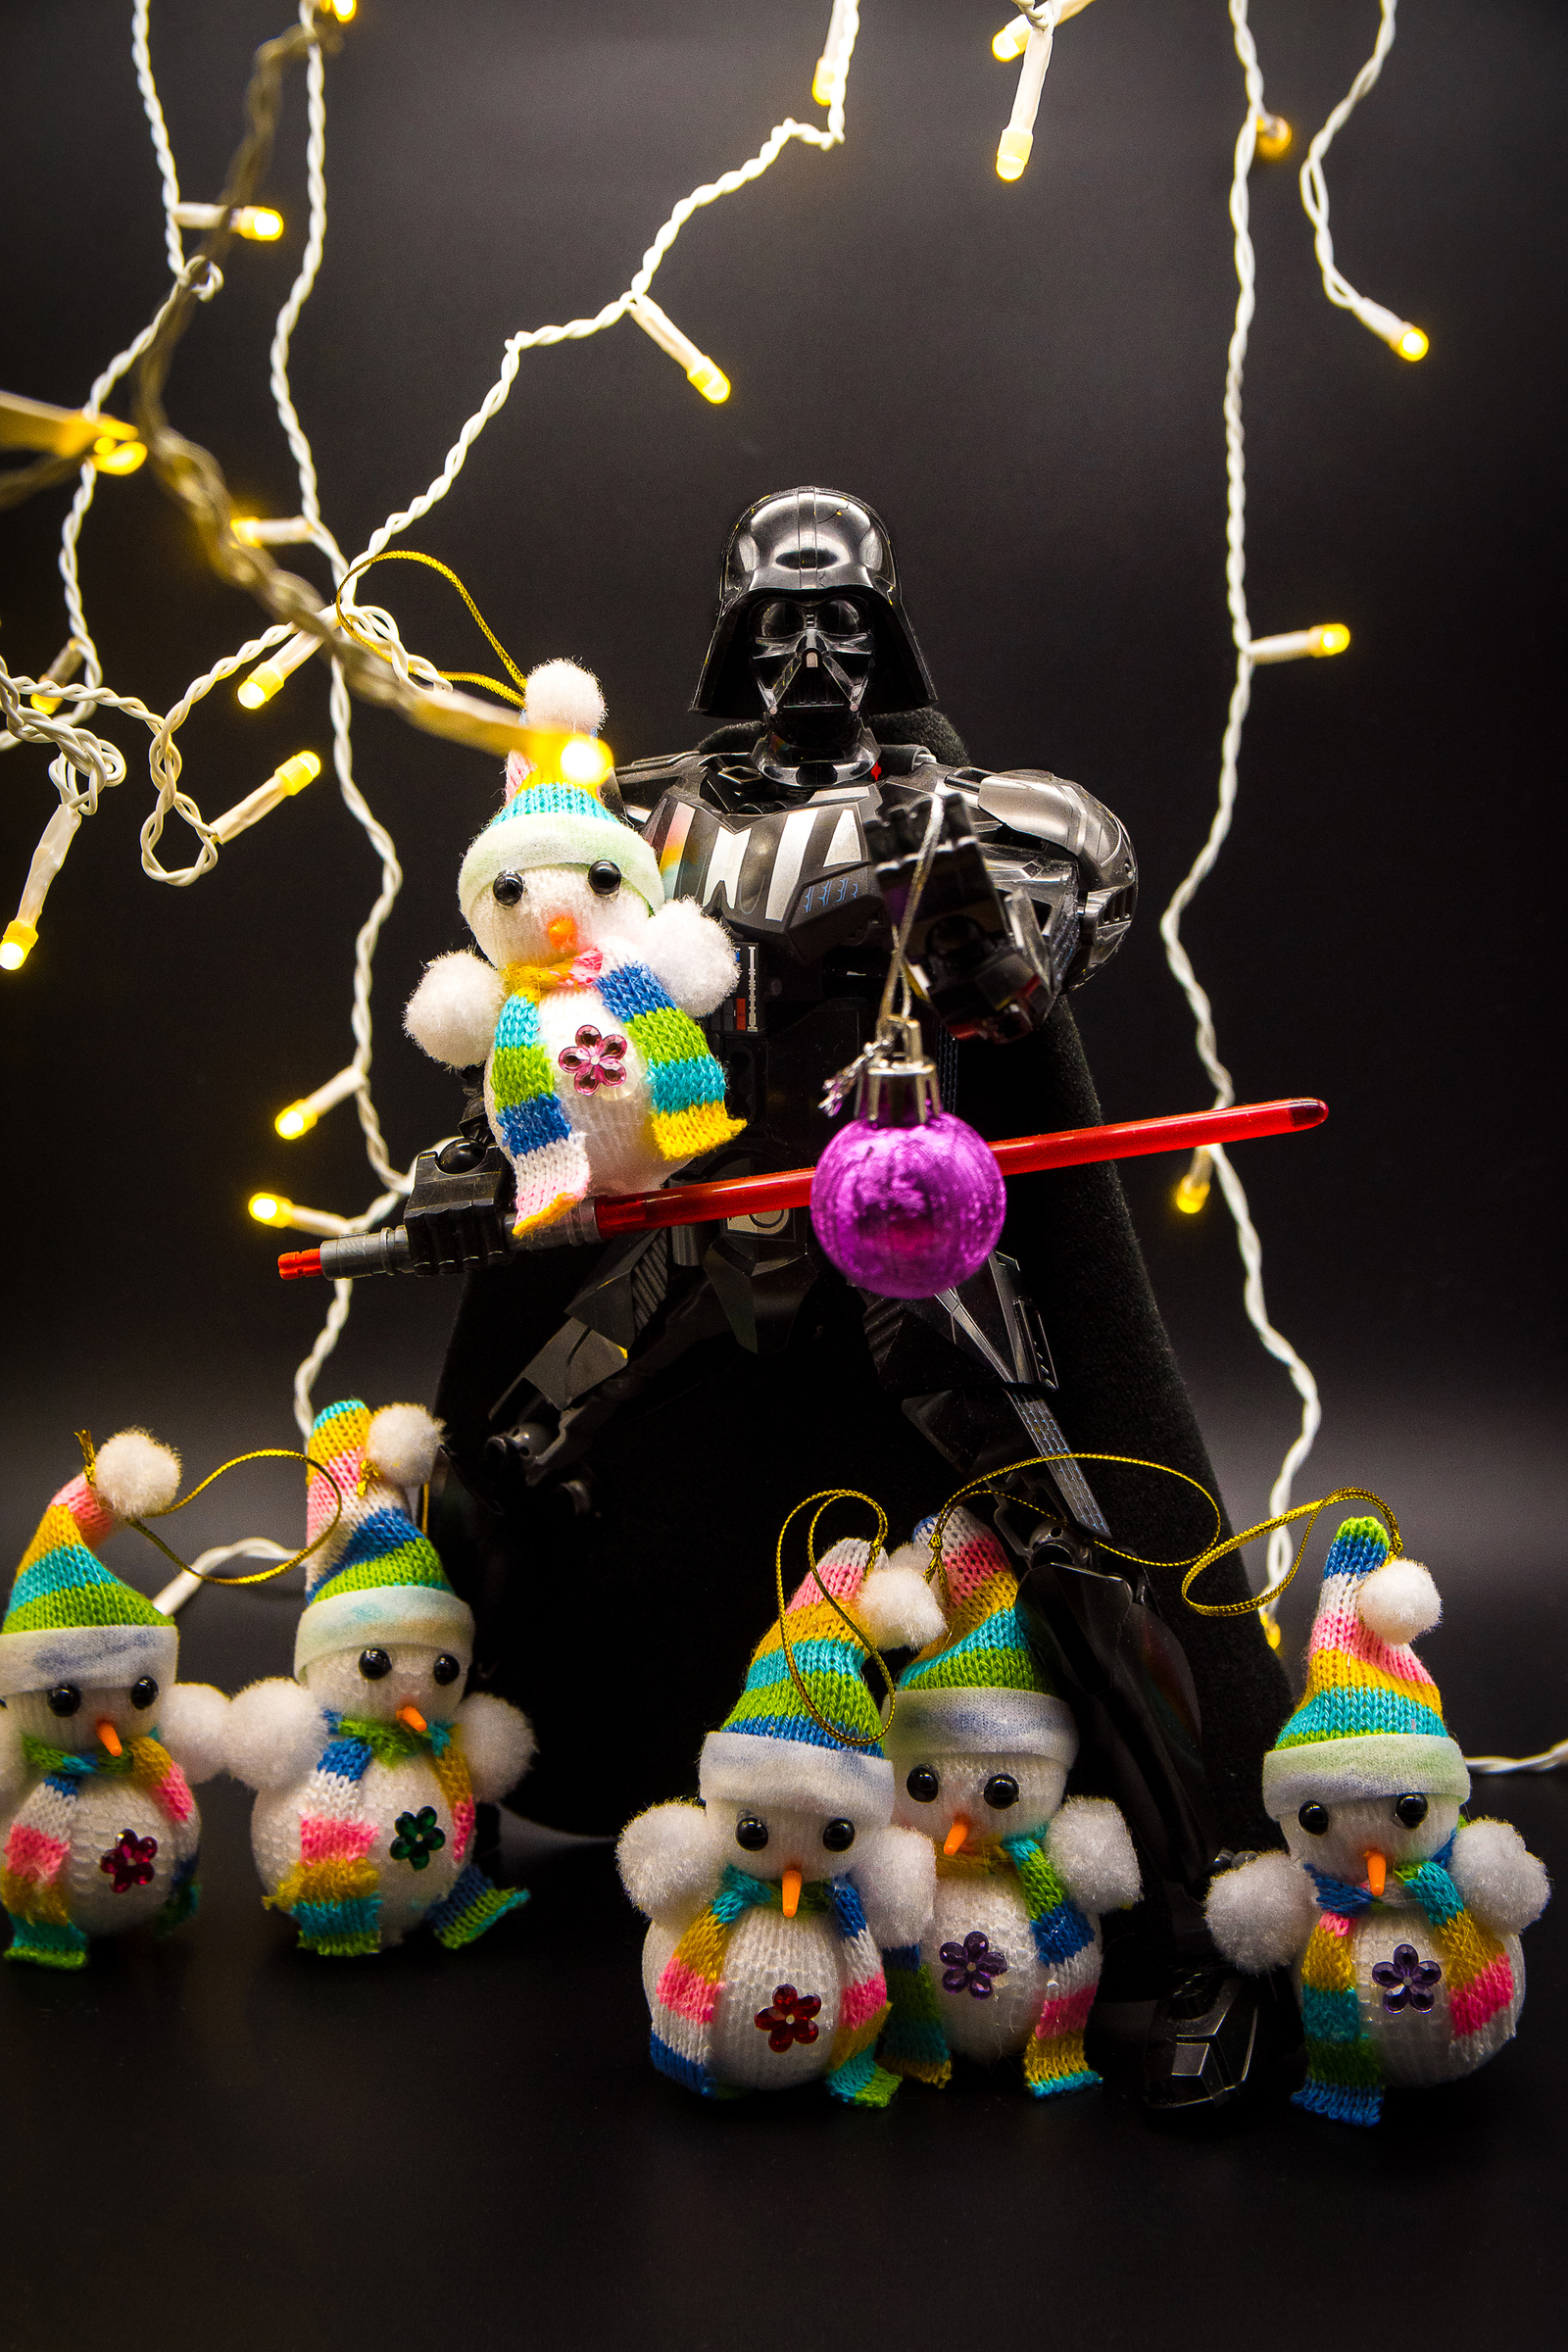 Dark outside, light inside - My, Darth vader, The Death Star, Star Wars, Photographer, The photo, New Year, snowman